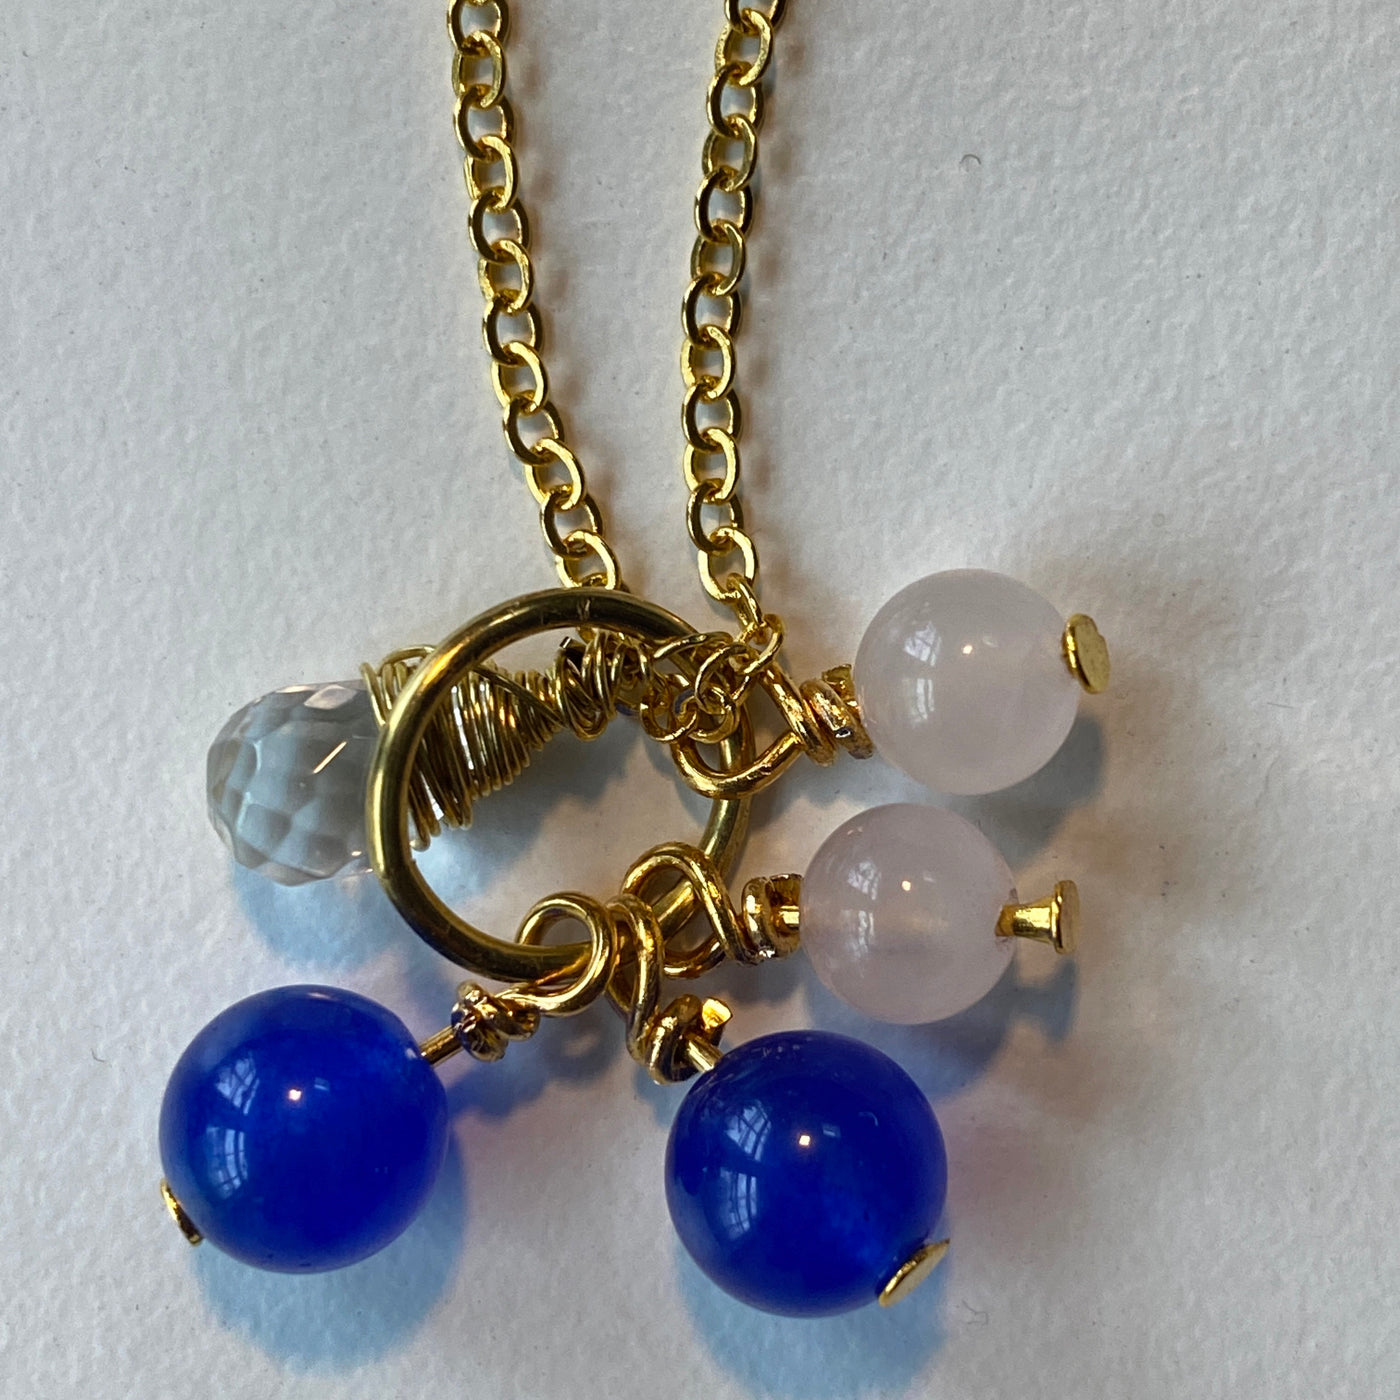 Chrystal briolette, blue chalcedony, rose quartz pendant for Shake and Move Collection